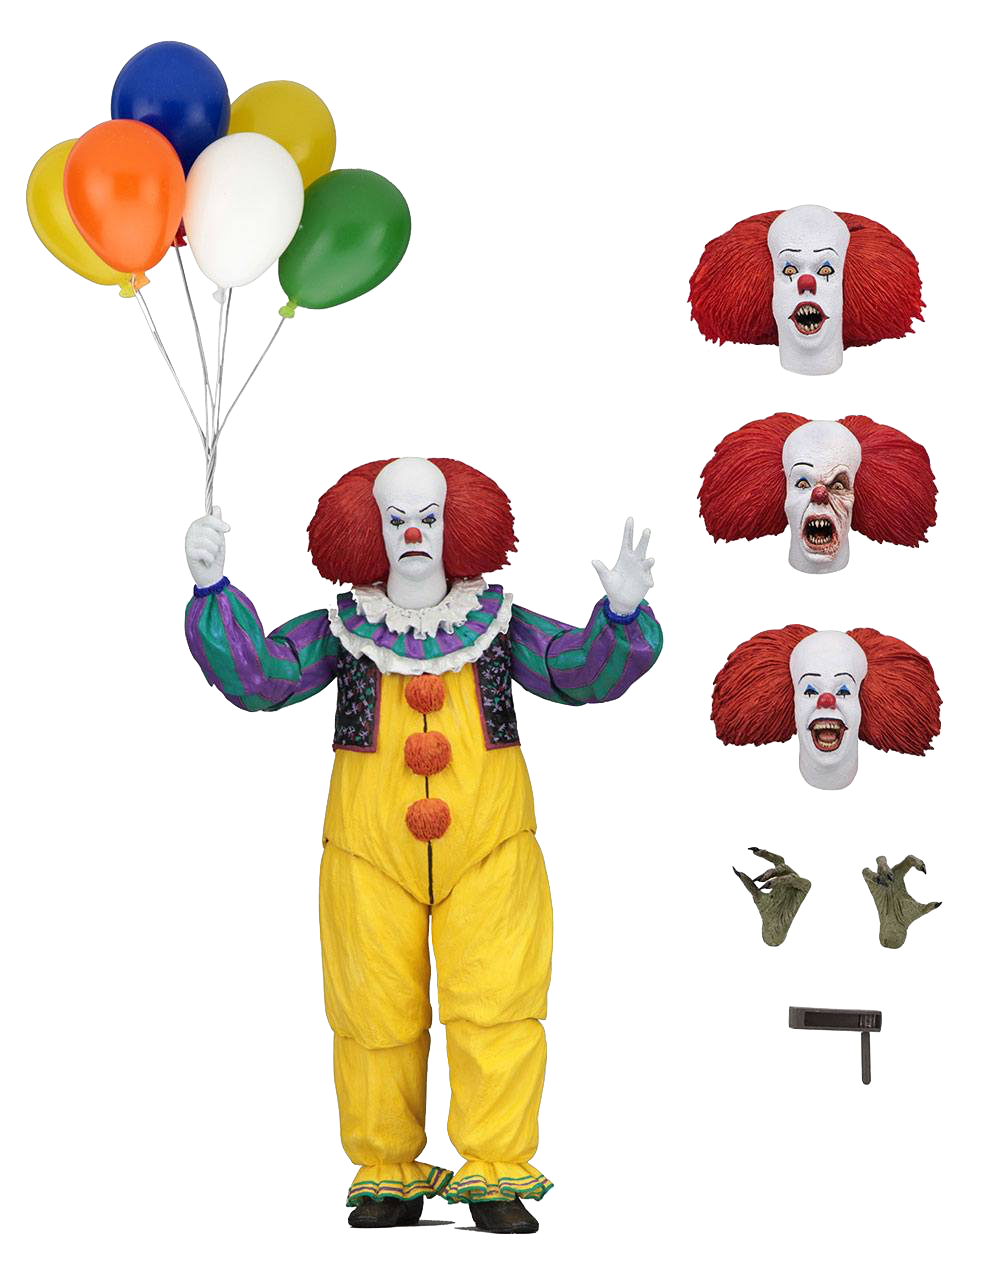 neca-1990-it-pennywise-ultimate-figure-toyslife